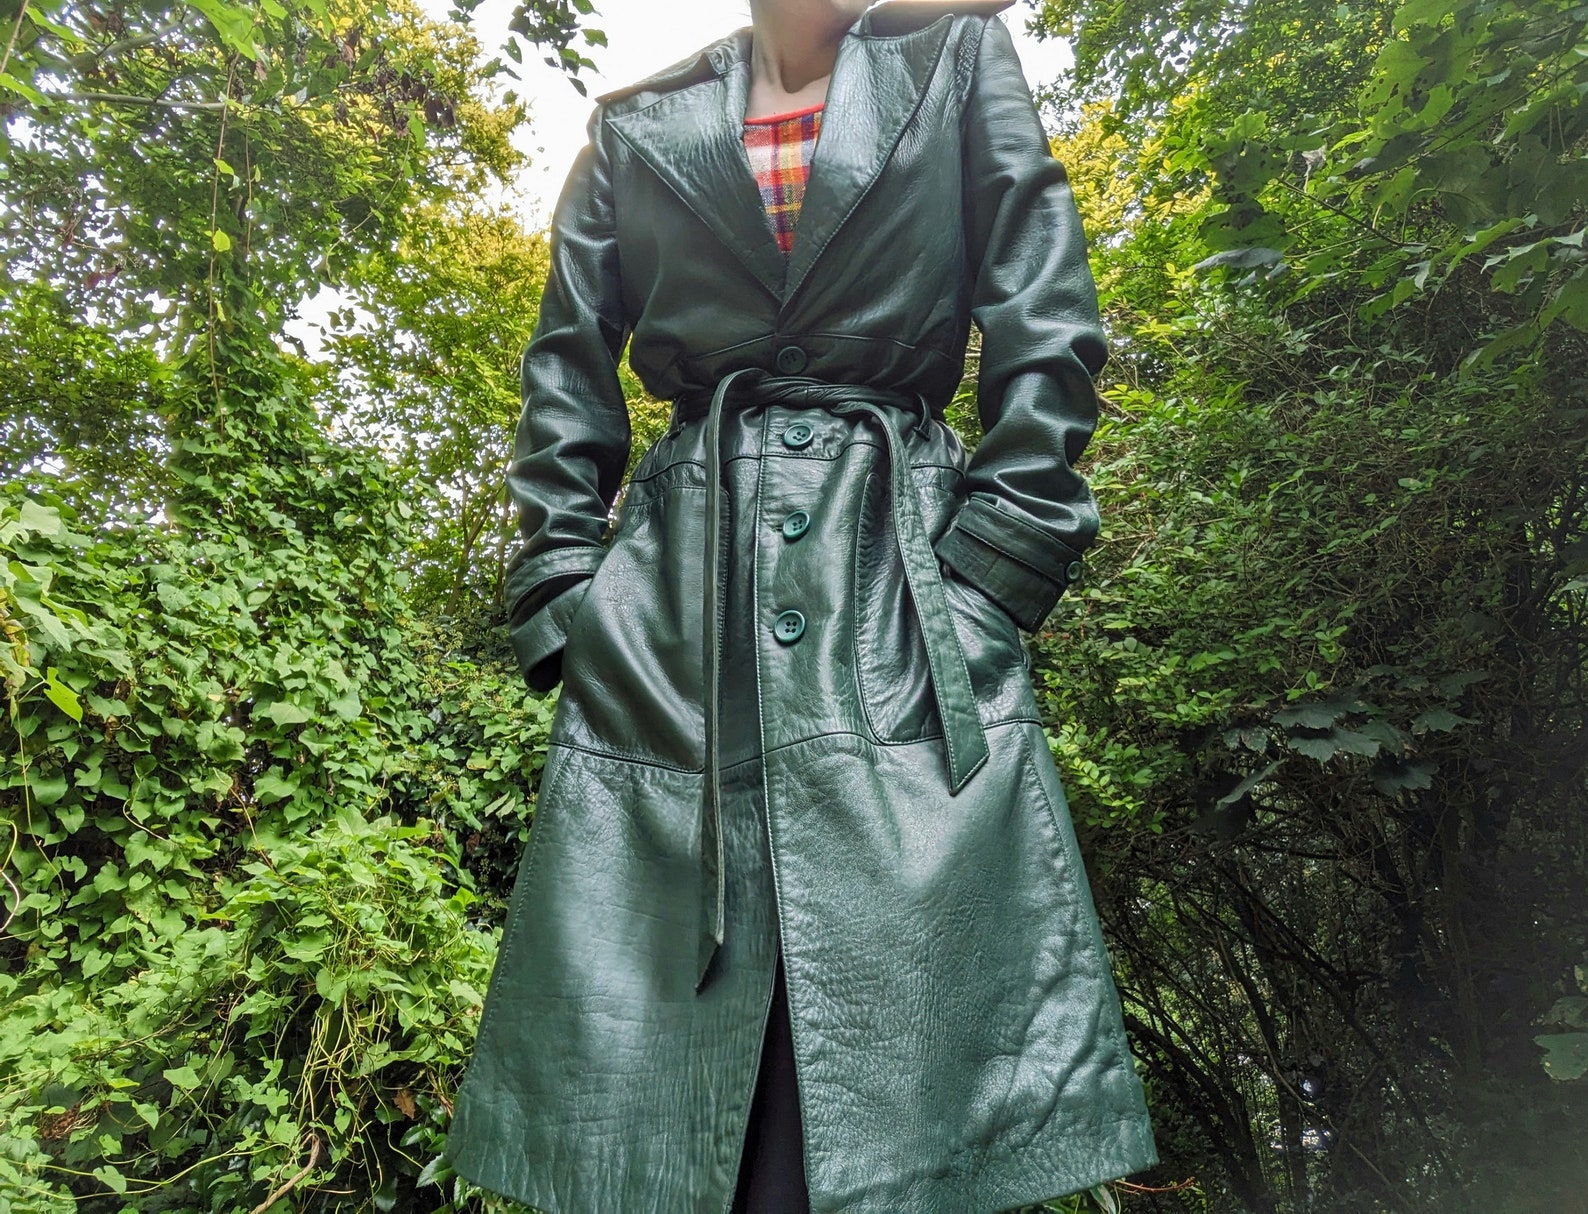 Since 1854 Leather Insert Trench Coat - Women - Ready-to-Wear